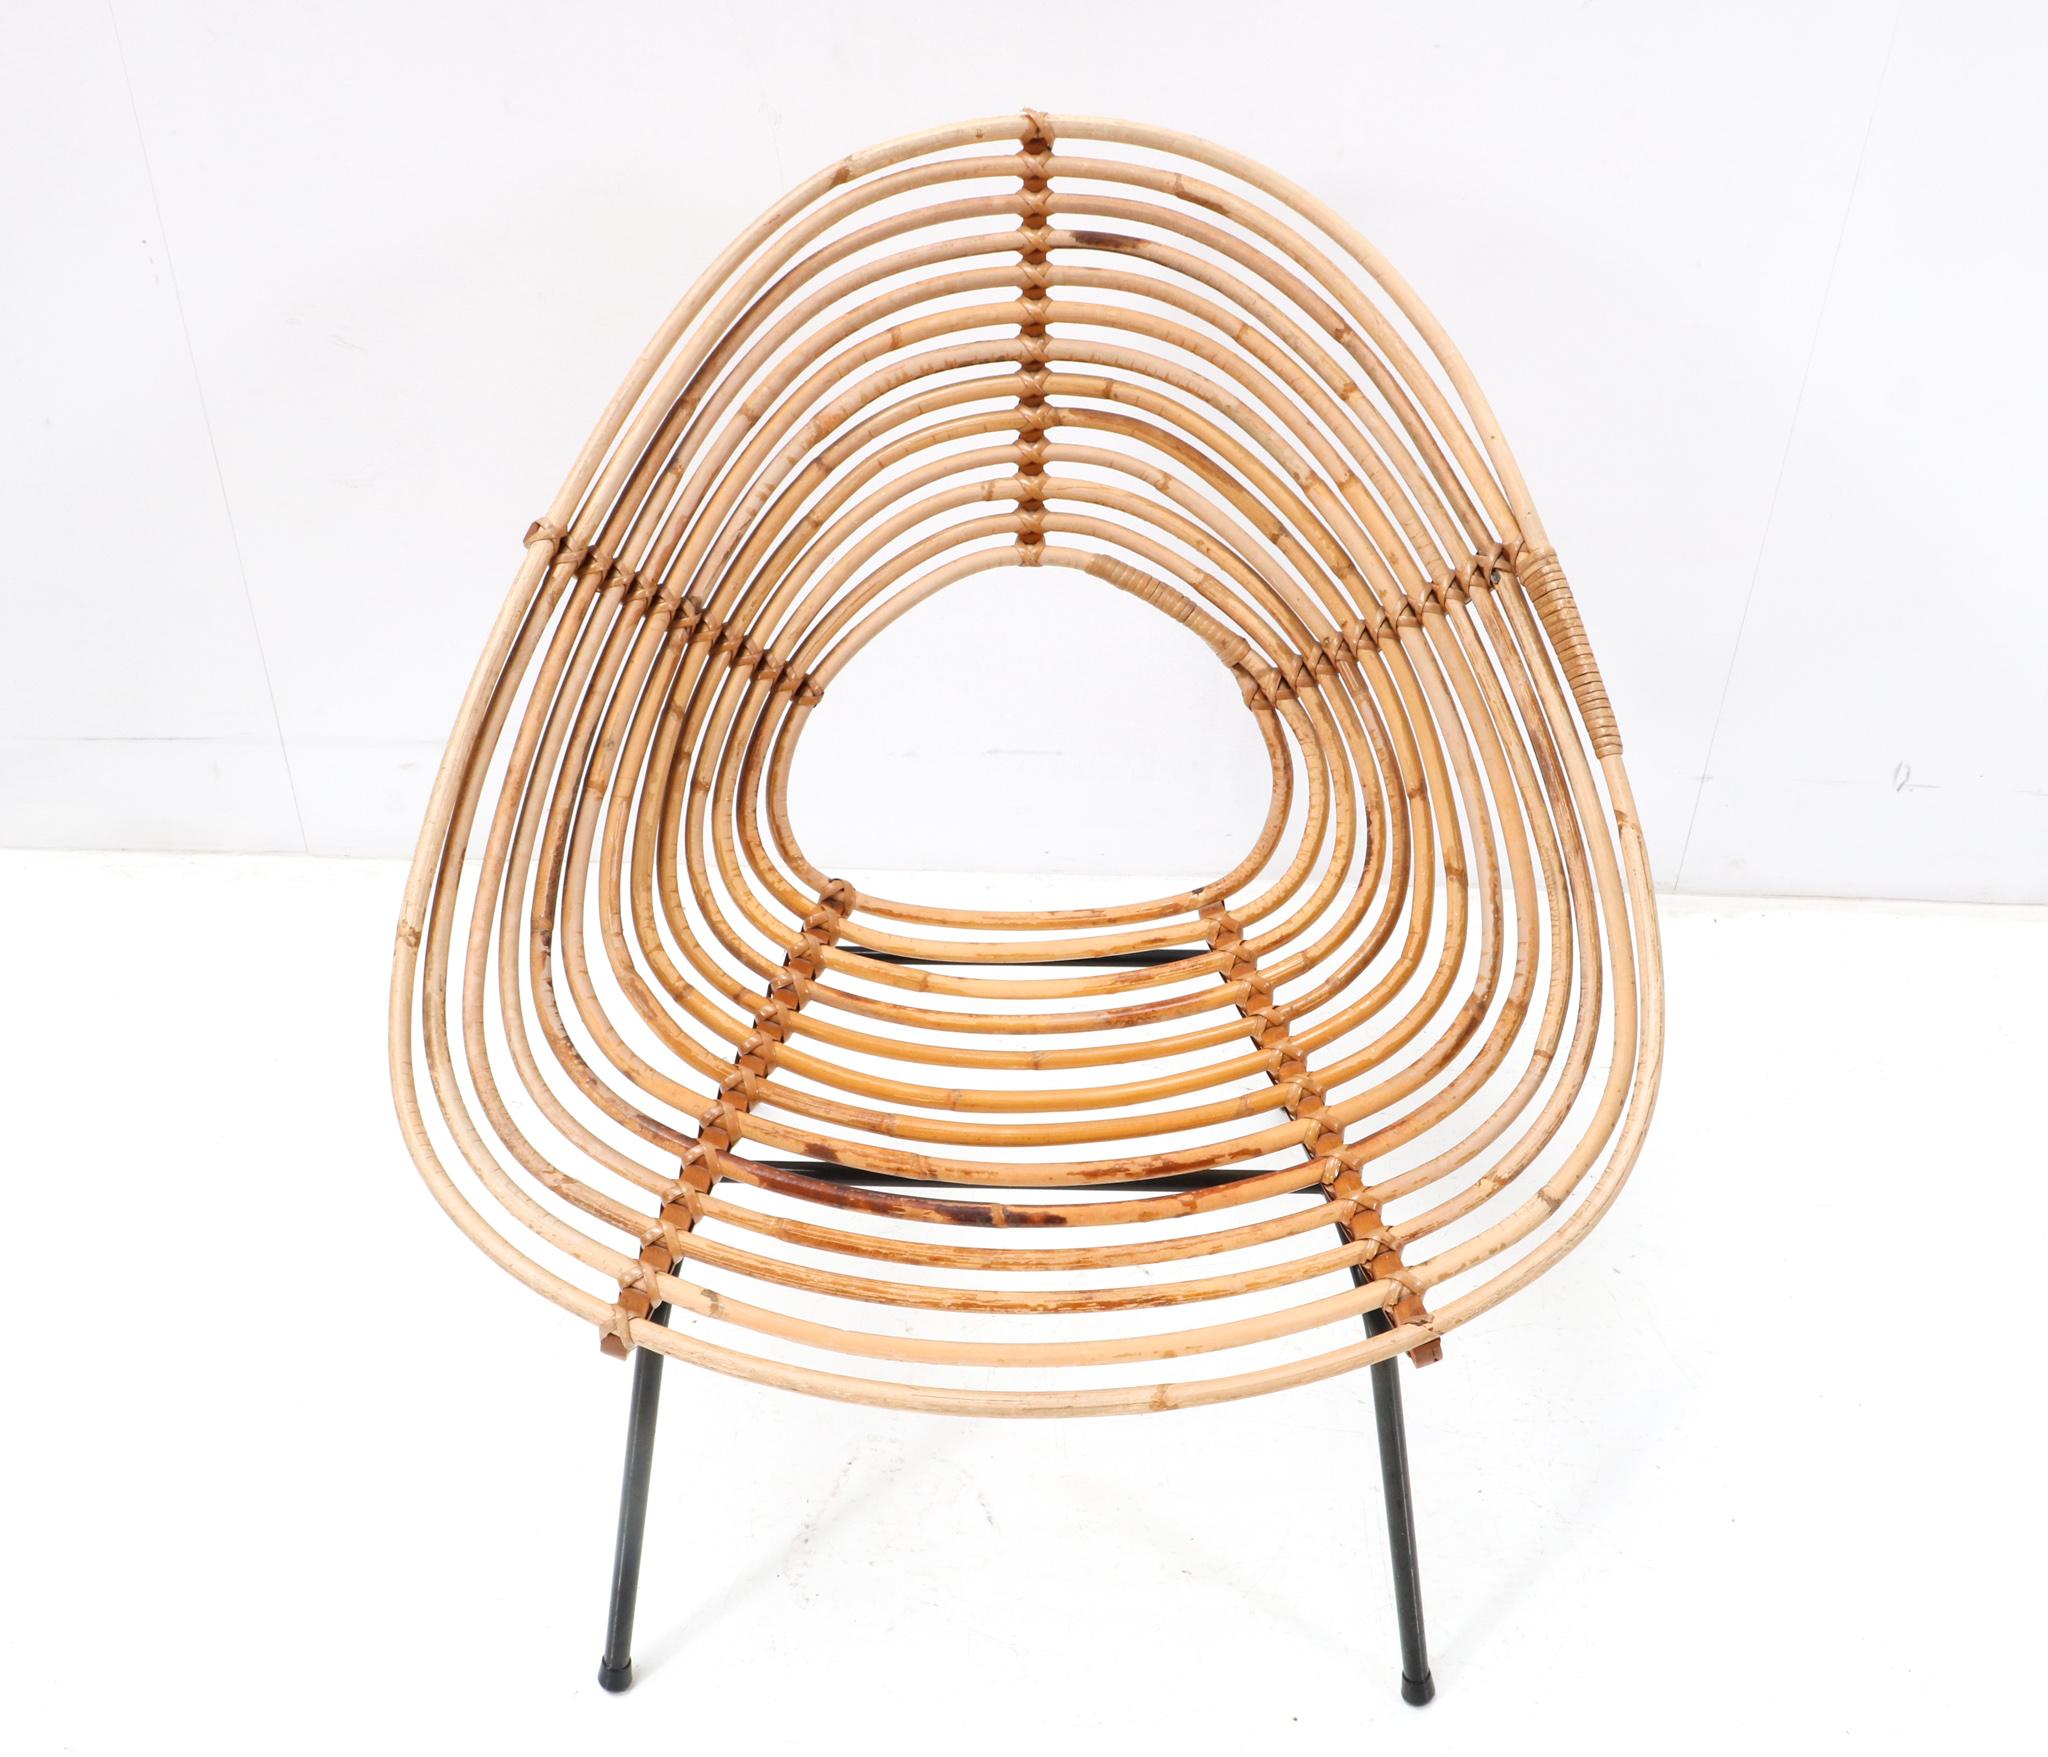 Amazing and rare Mid-Century Modern lounge chair.
Design by Dirk van Sliedregt for Rohe Noordwolde.
Striking Dutch design from the 1950s.
Elegant ballon shaped rattan frame on black lacquered metal feet.
This wonderful Mid-Century Modern lounge